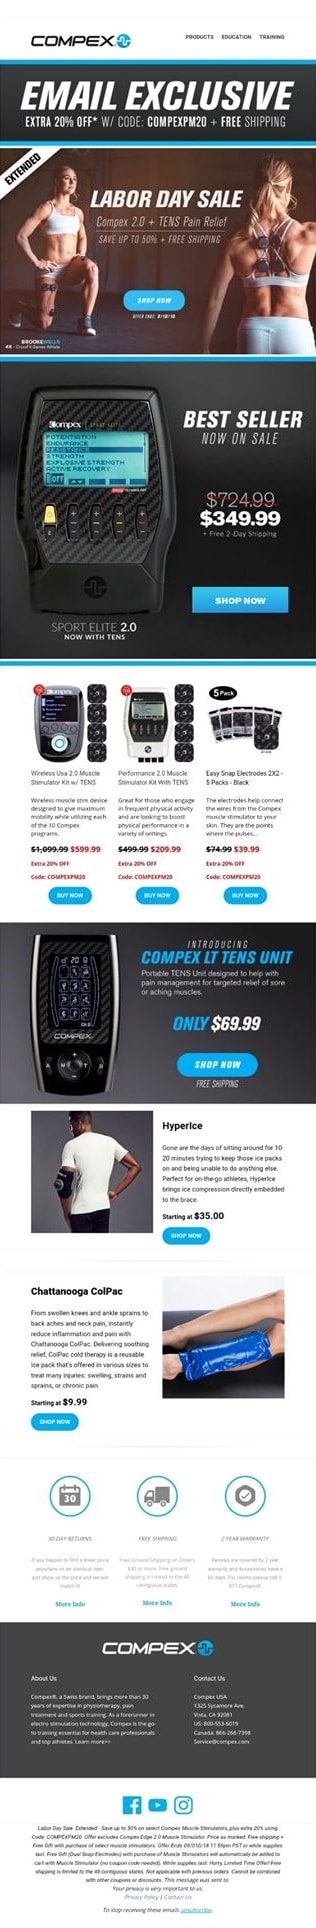 This Labor Day/end of summer email from Compex encourages subscribers to make a purchase.